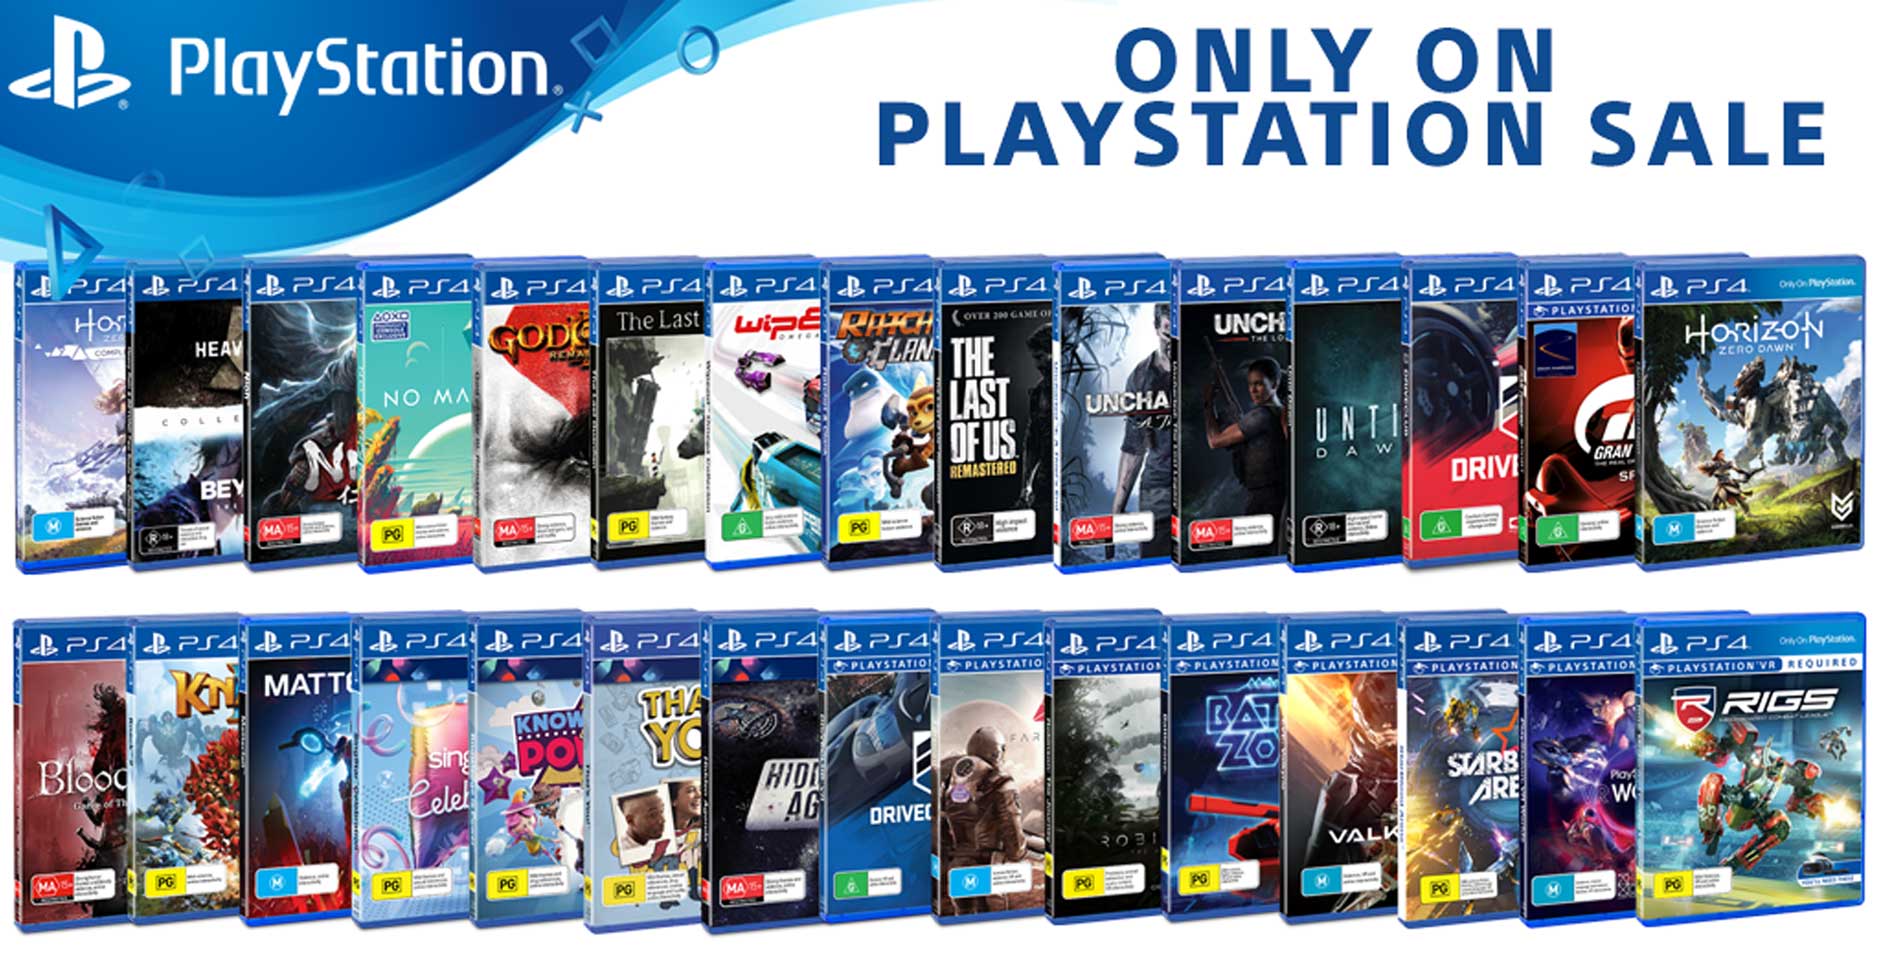 The Best Deals In PlayStation's 'Only On PlayStation' Sale